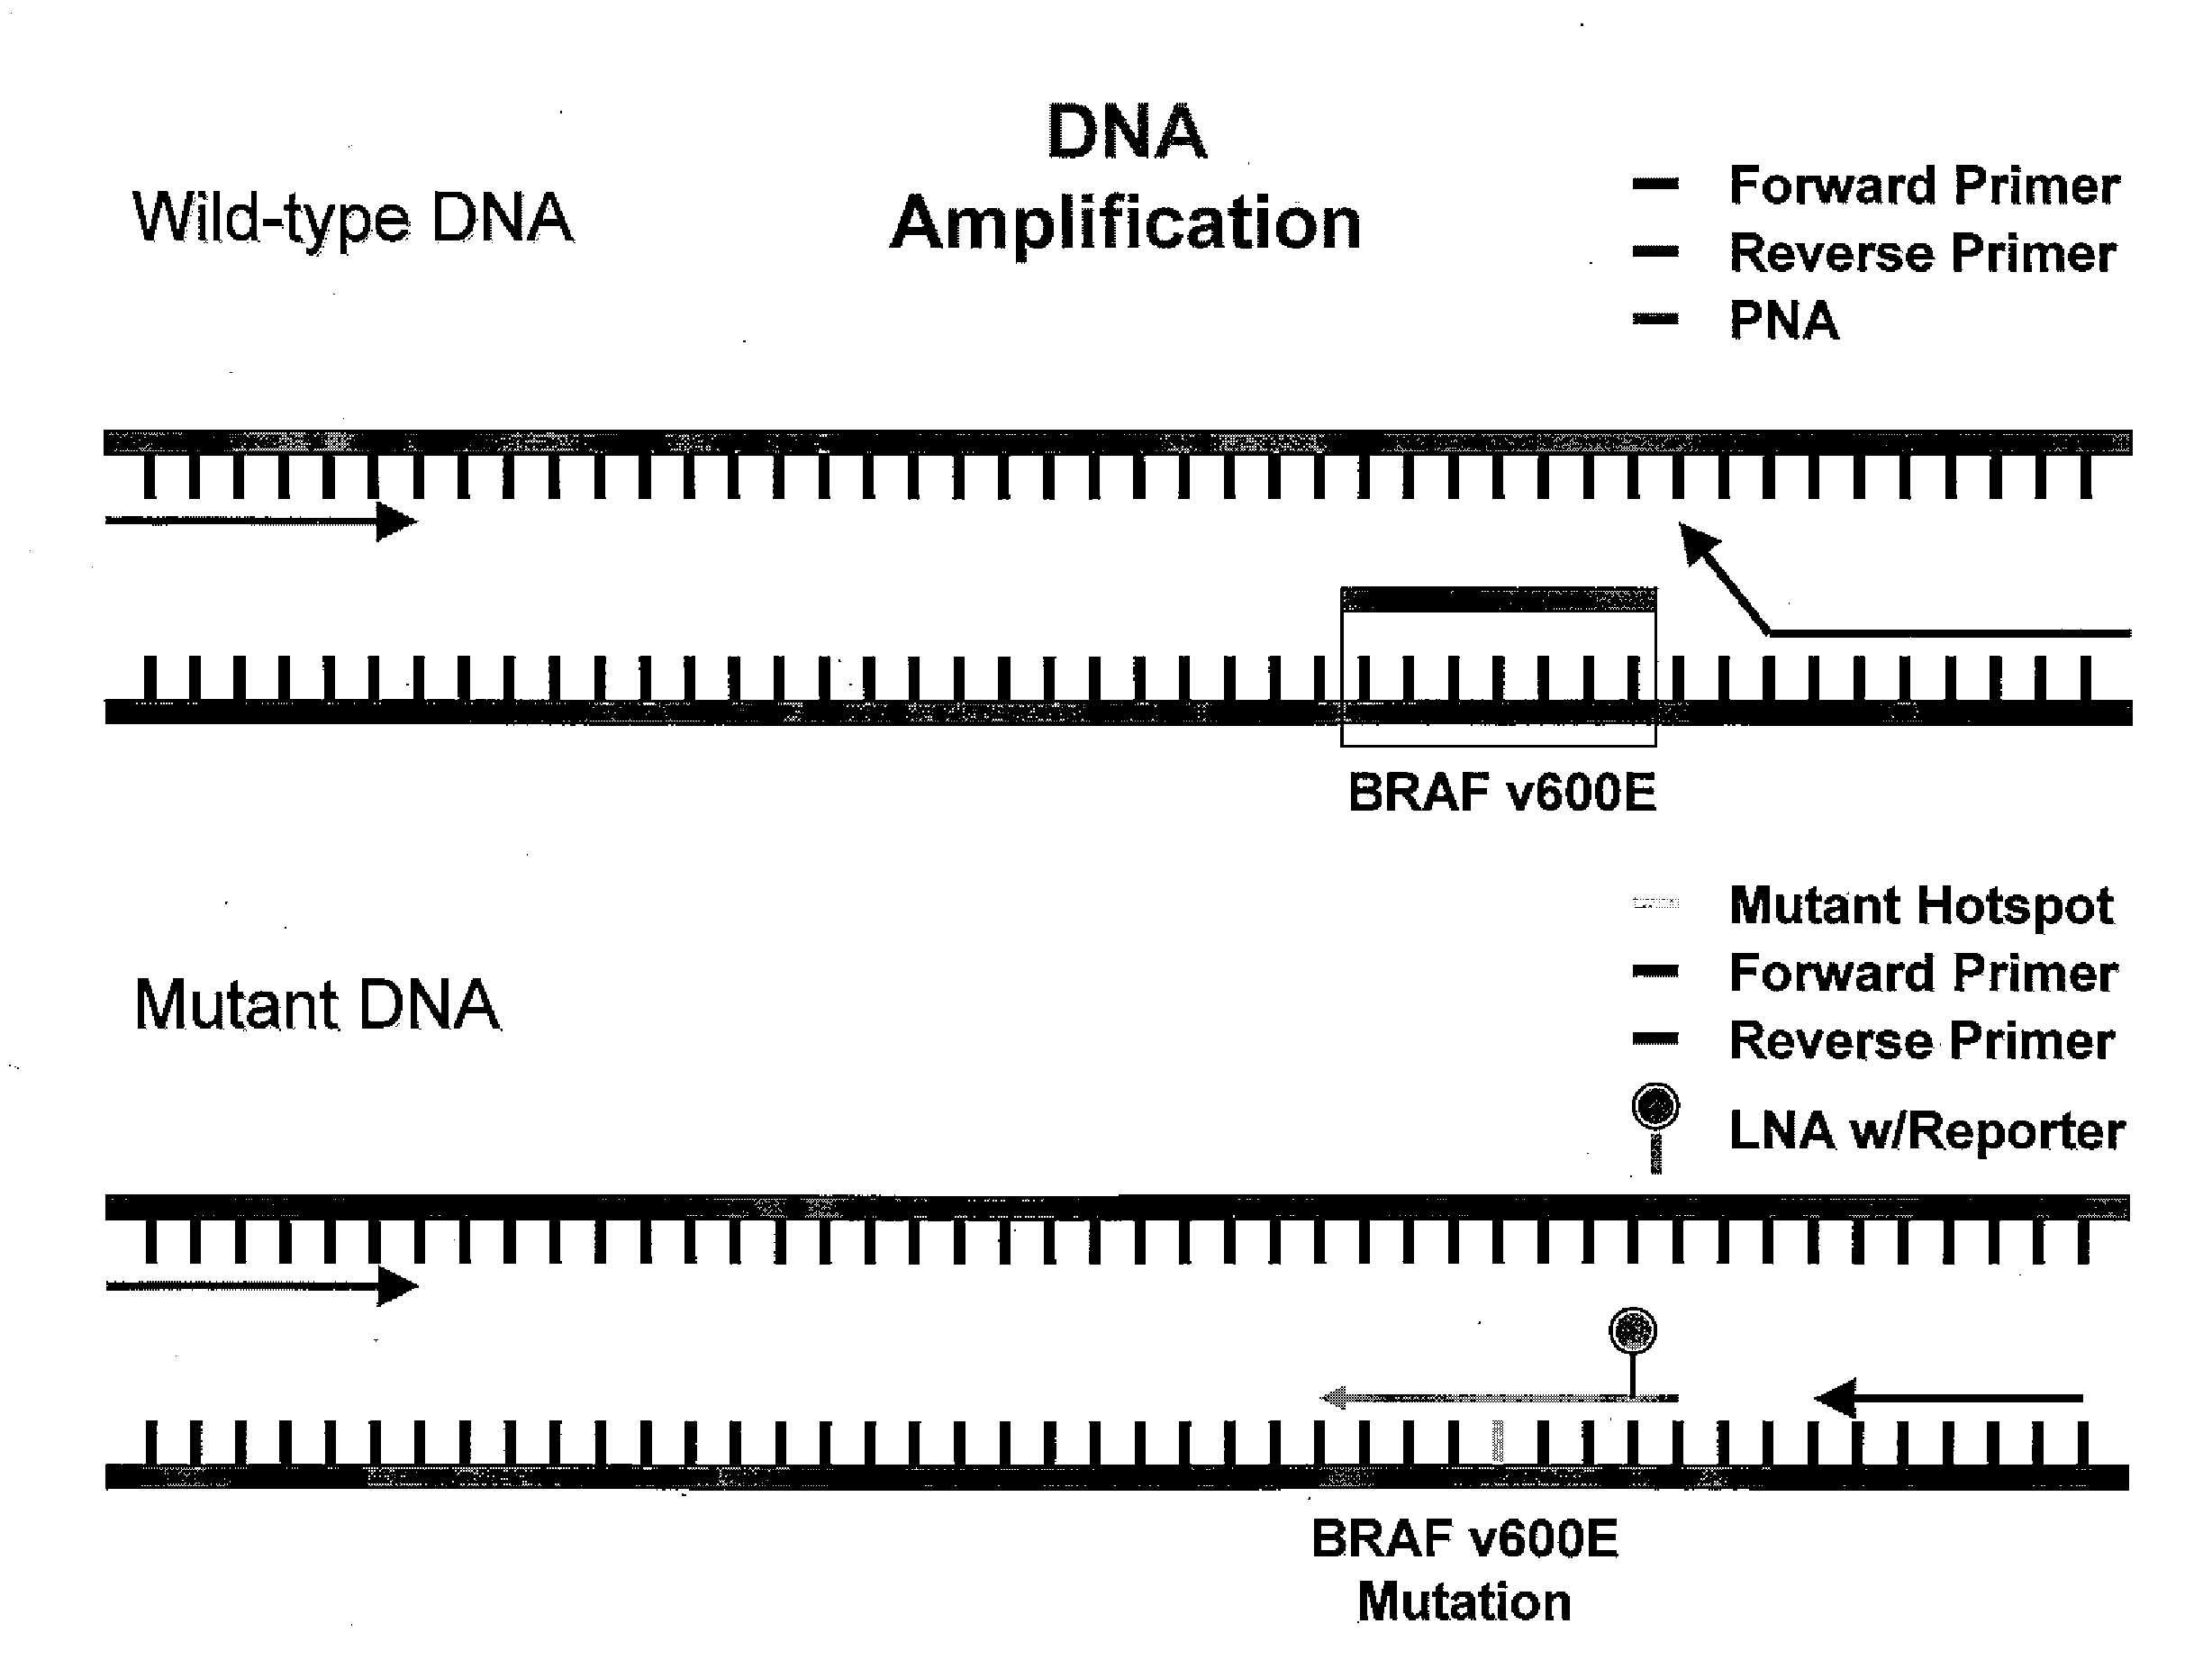 Utility of b-raf DNA mutation in diagnosis and treatment of cancer